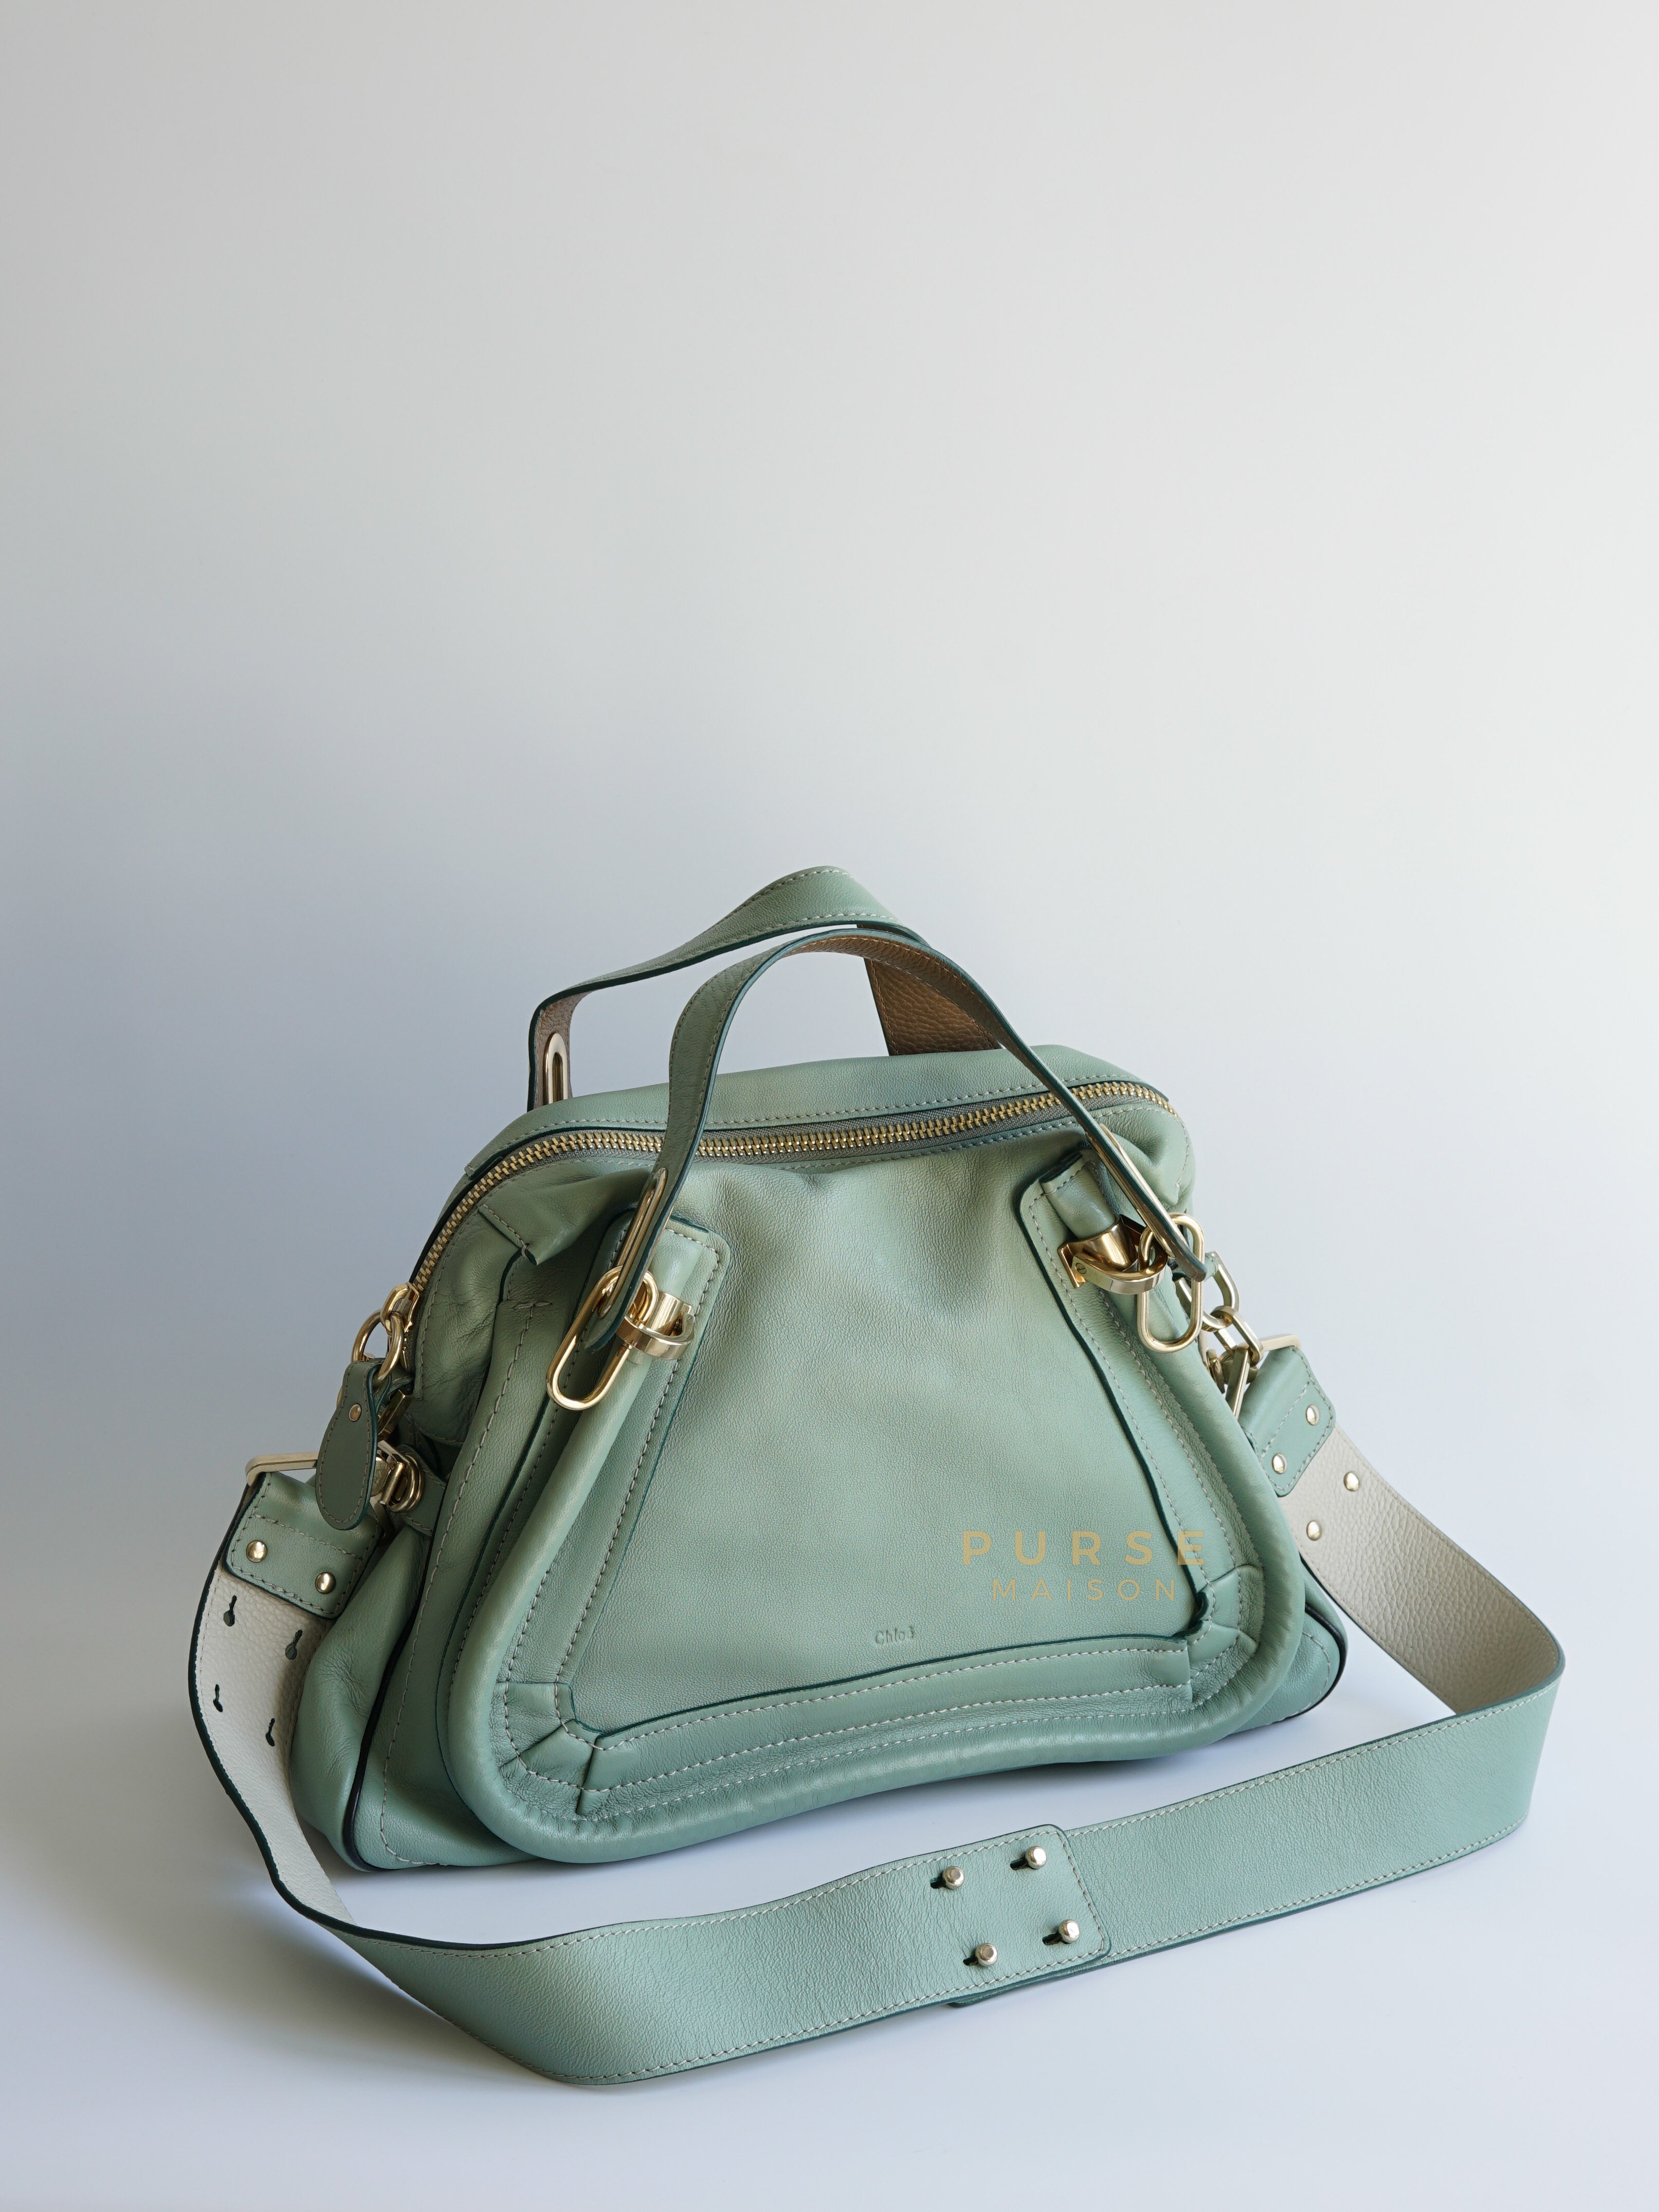 Paraty in Light Blue Green Pebbled Calfskin Leather Bag | Purse Maison Luxury Bags Shop